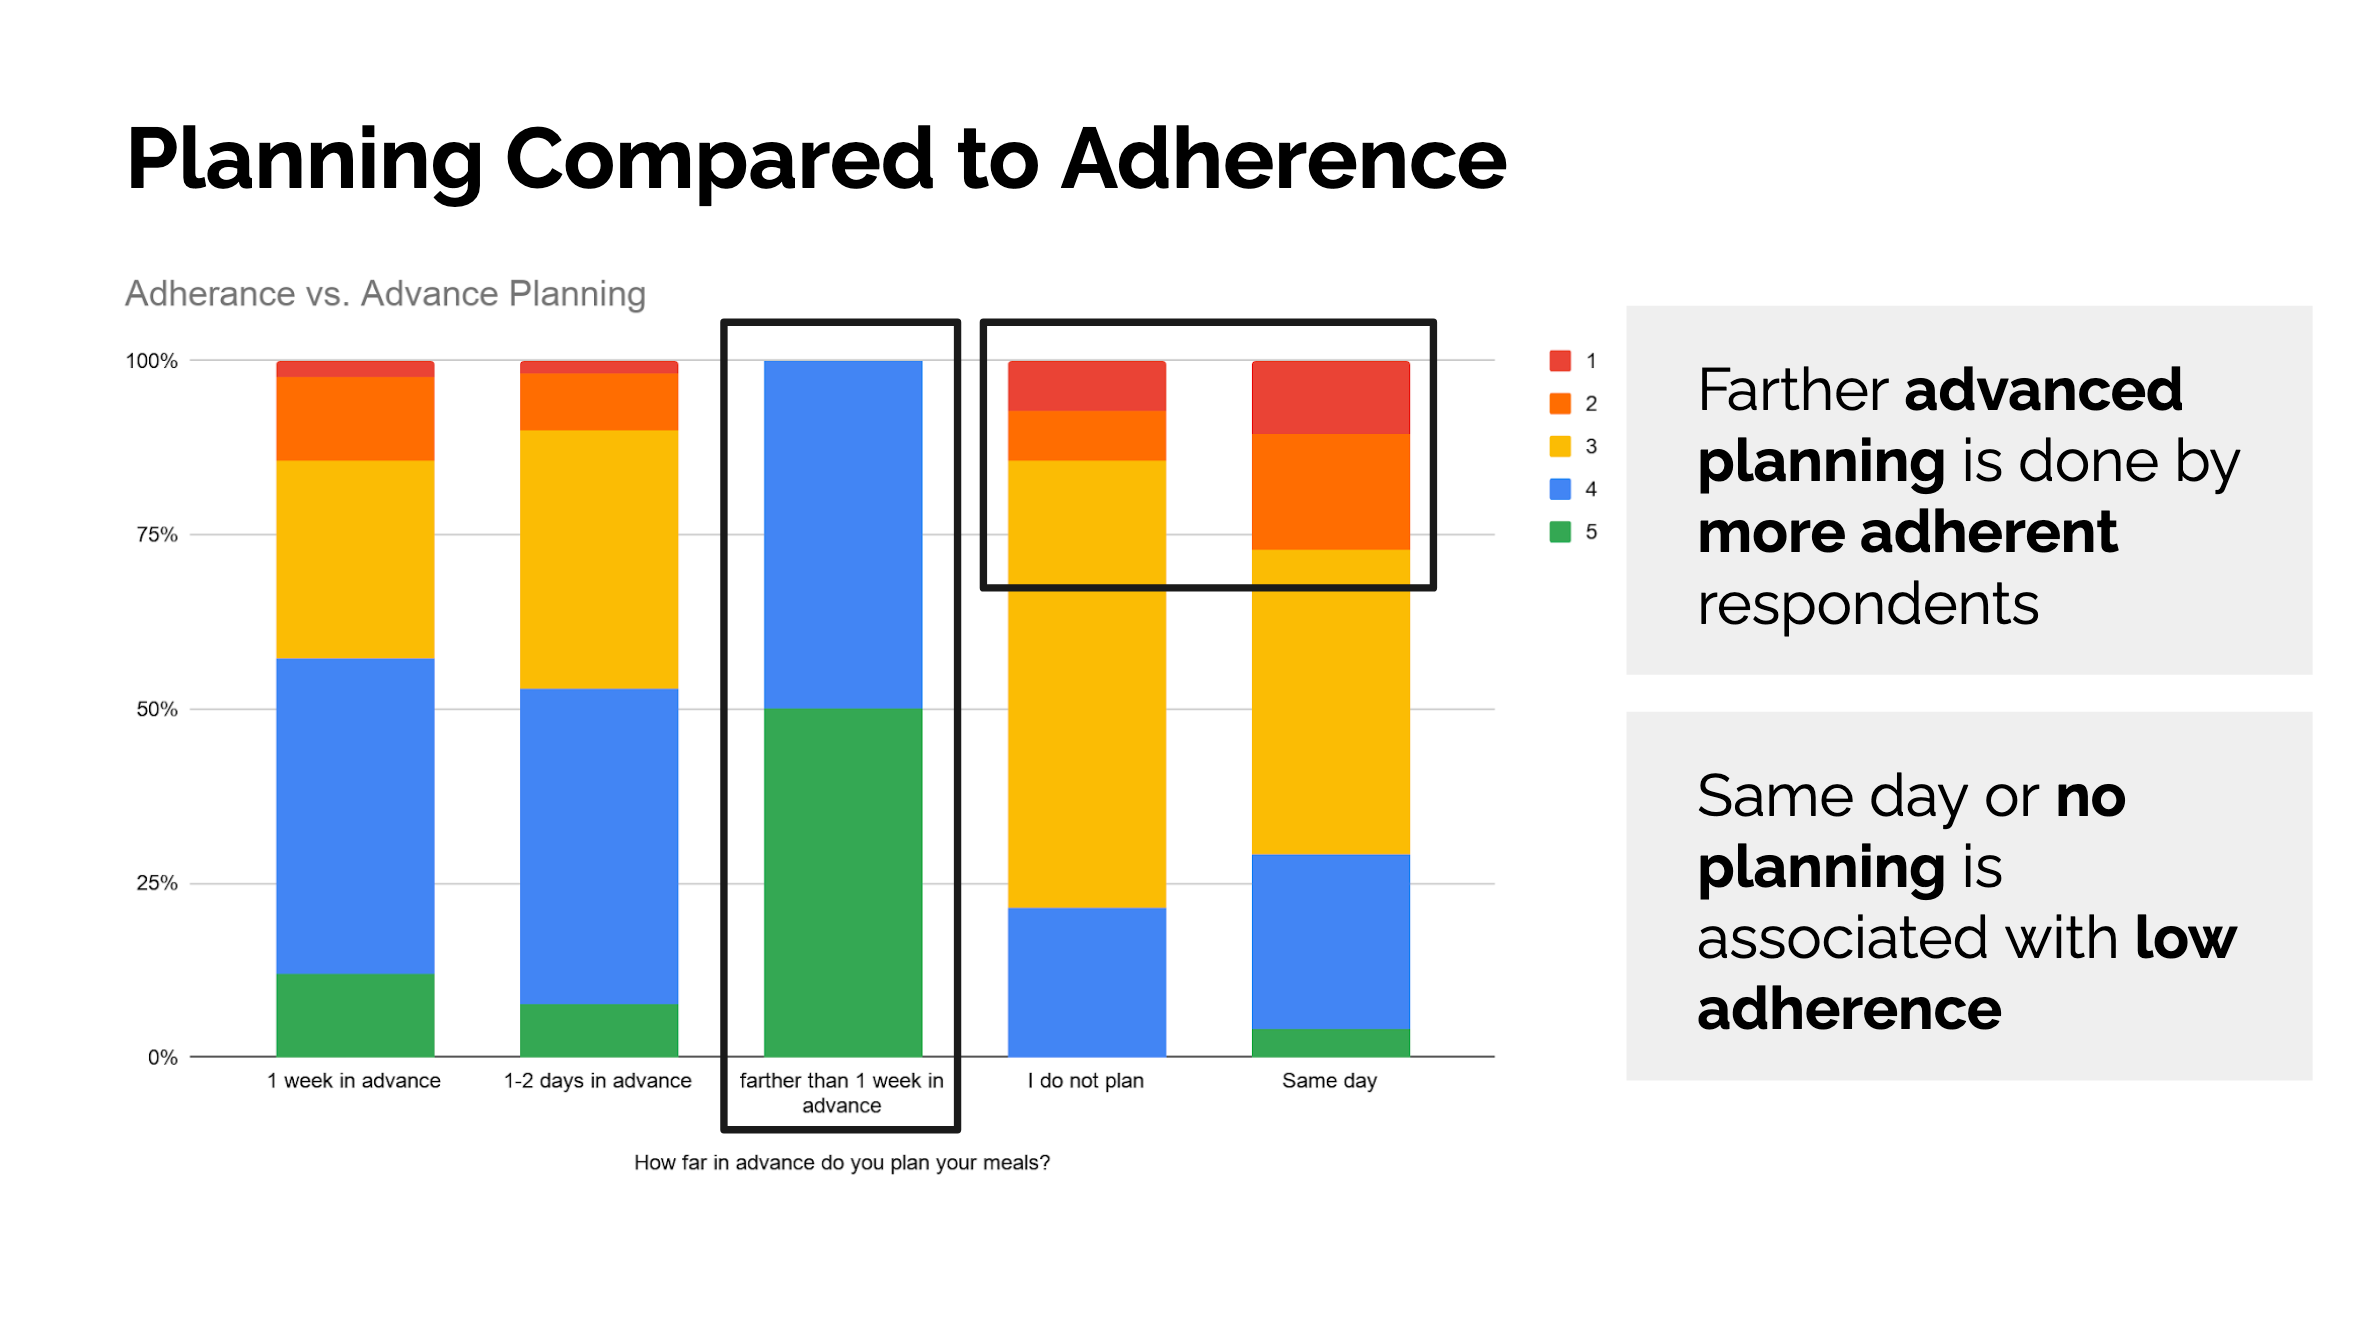 Bar graph showing that participants who plan father in advance have a higher reported adherence to the program, while participants who do little or no planning have low adherence.